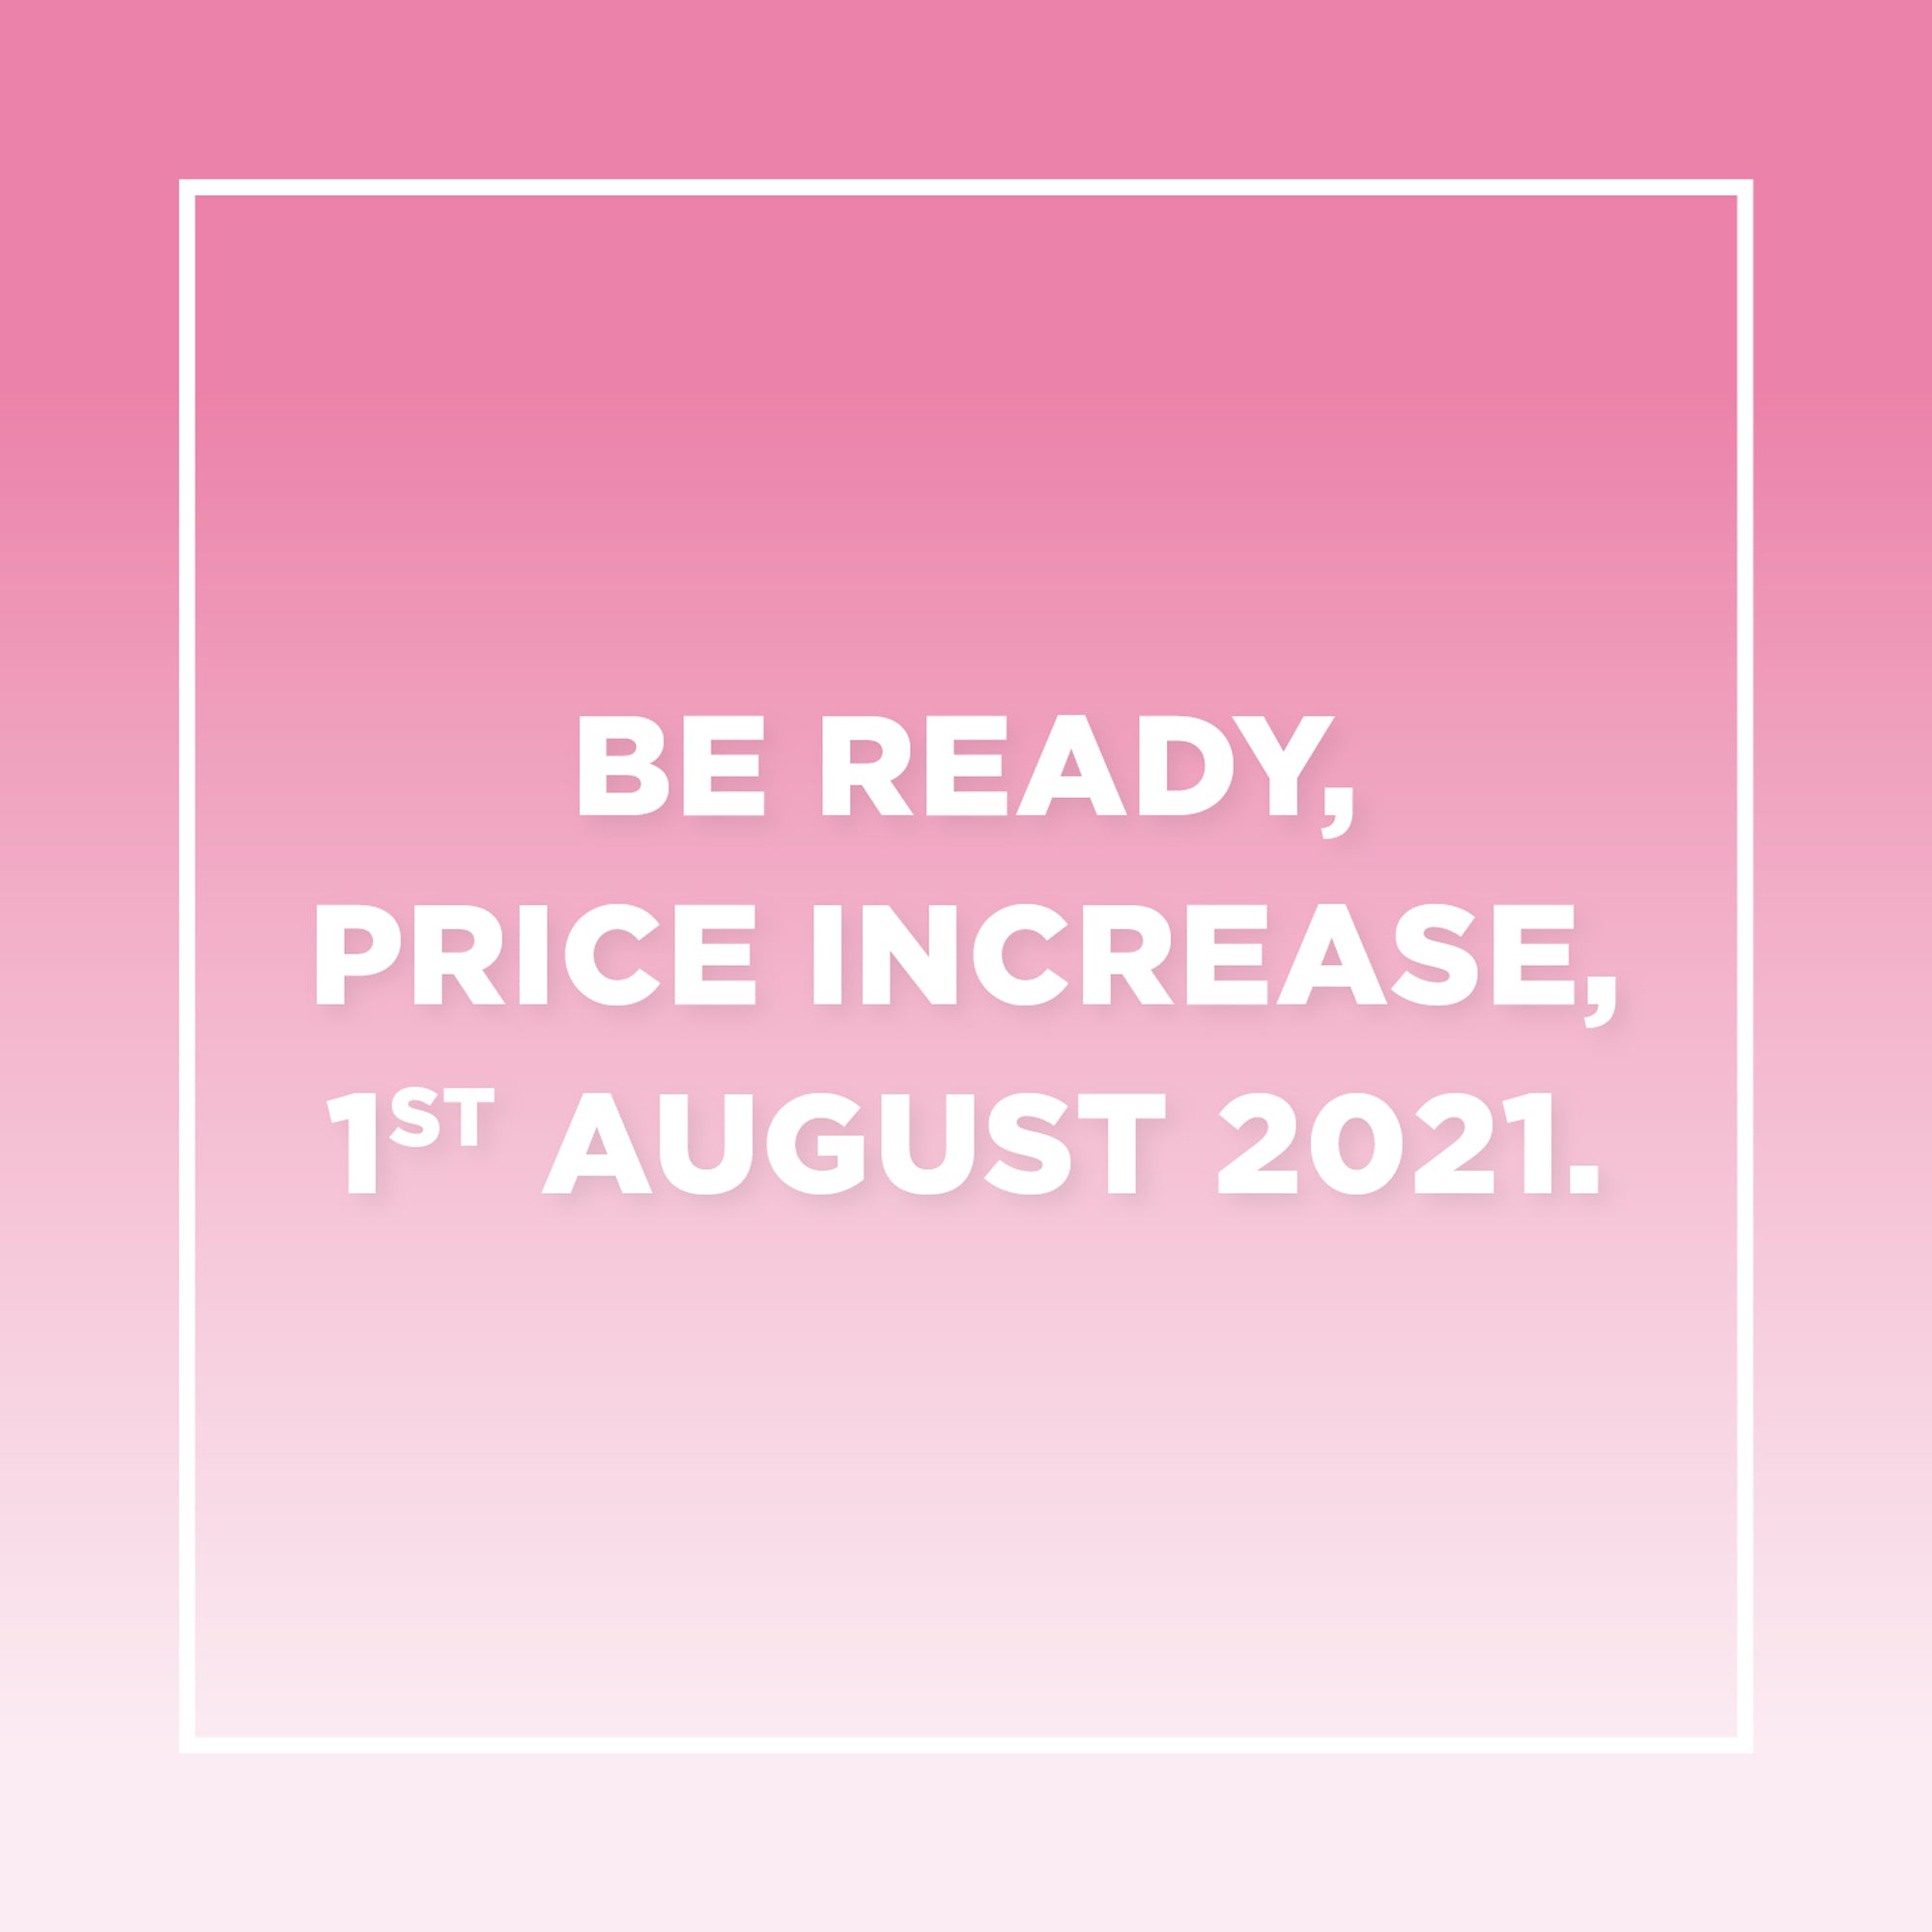 Price Increase 1st August 2021